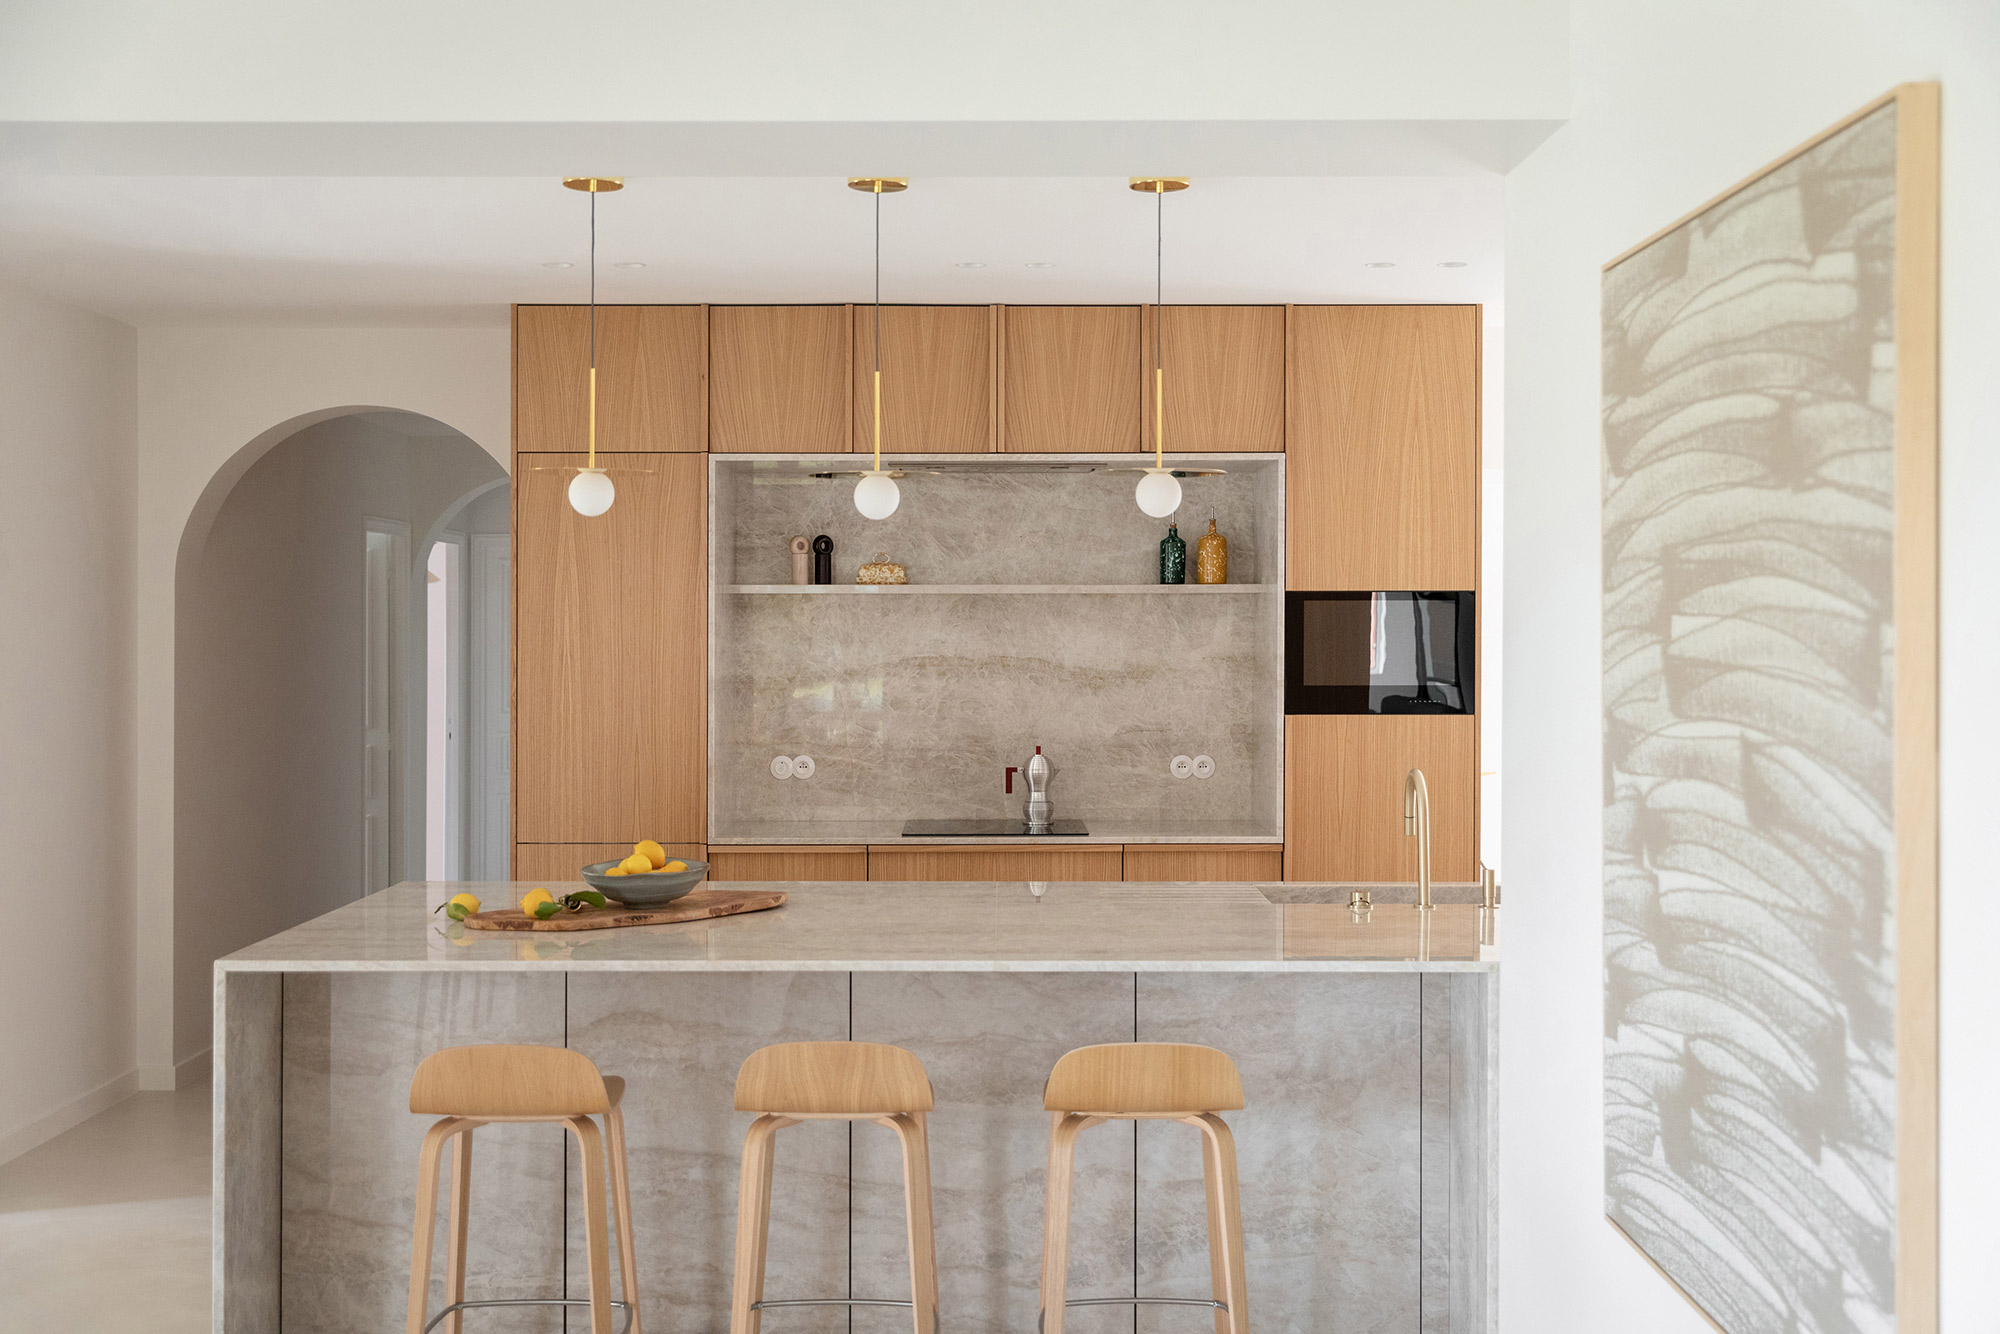 Image of bcdf studio grasse 4 in Dekton Sirius adds a welcoming touch to the kitchens of a residential development in Dubai - Cosentino